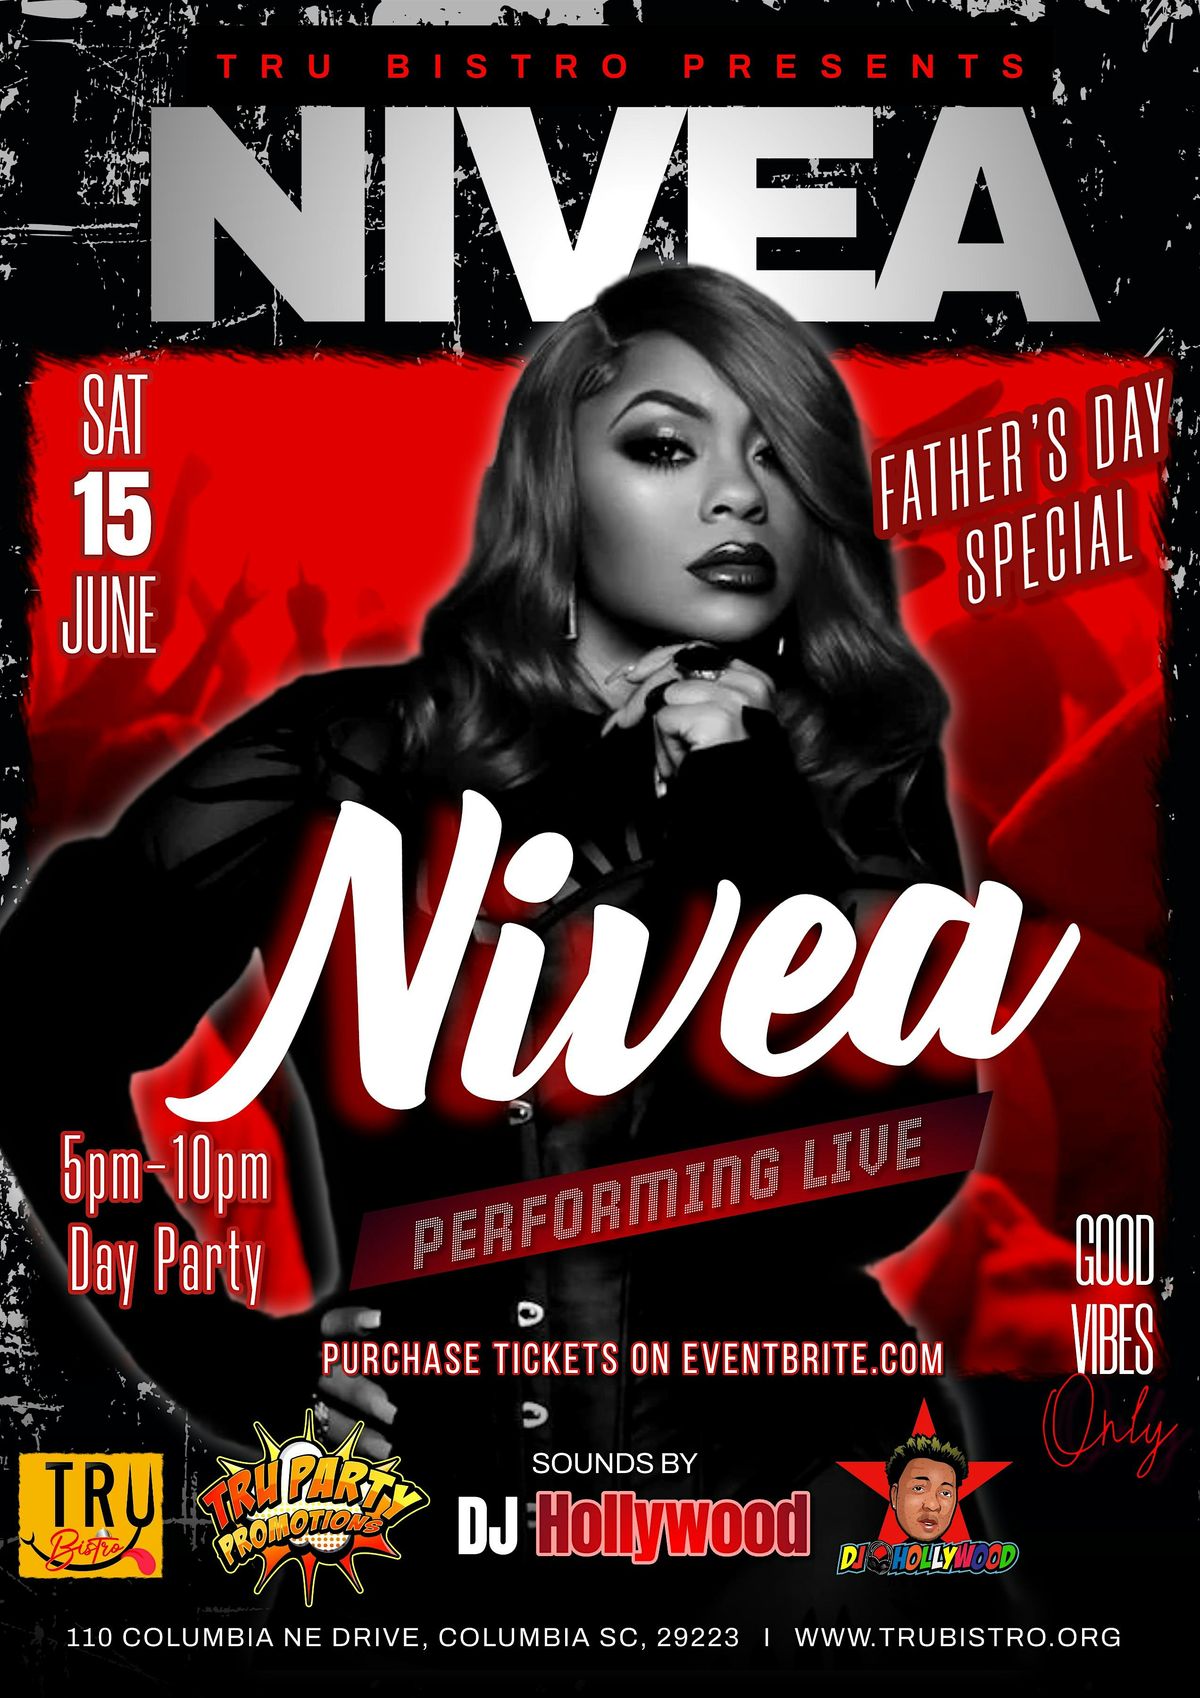 25 REASONS EDITION "FATHER'S DAY SPECIAL" WITH NIVEA PERFORMING LIVE AT TRU BISTRO